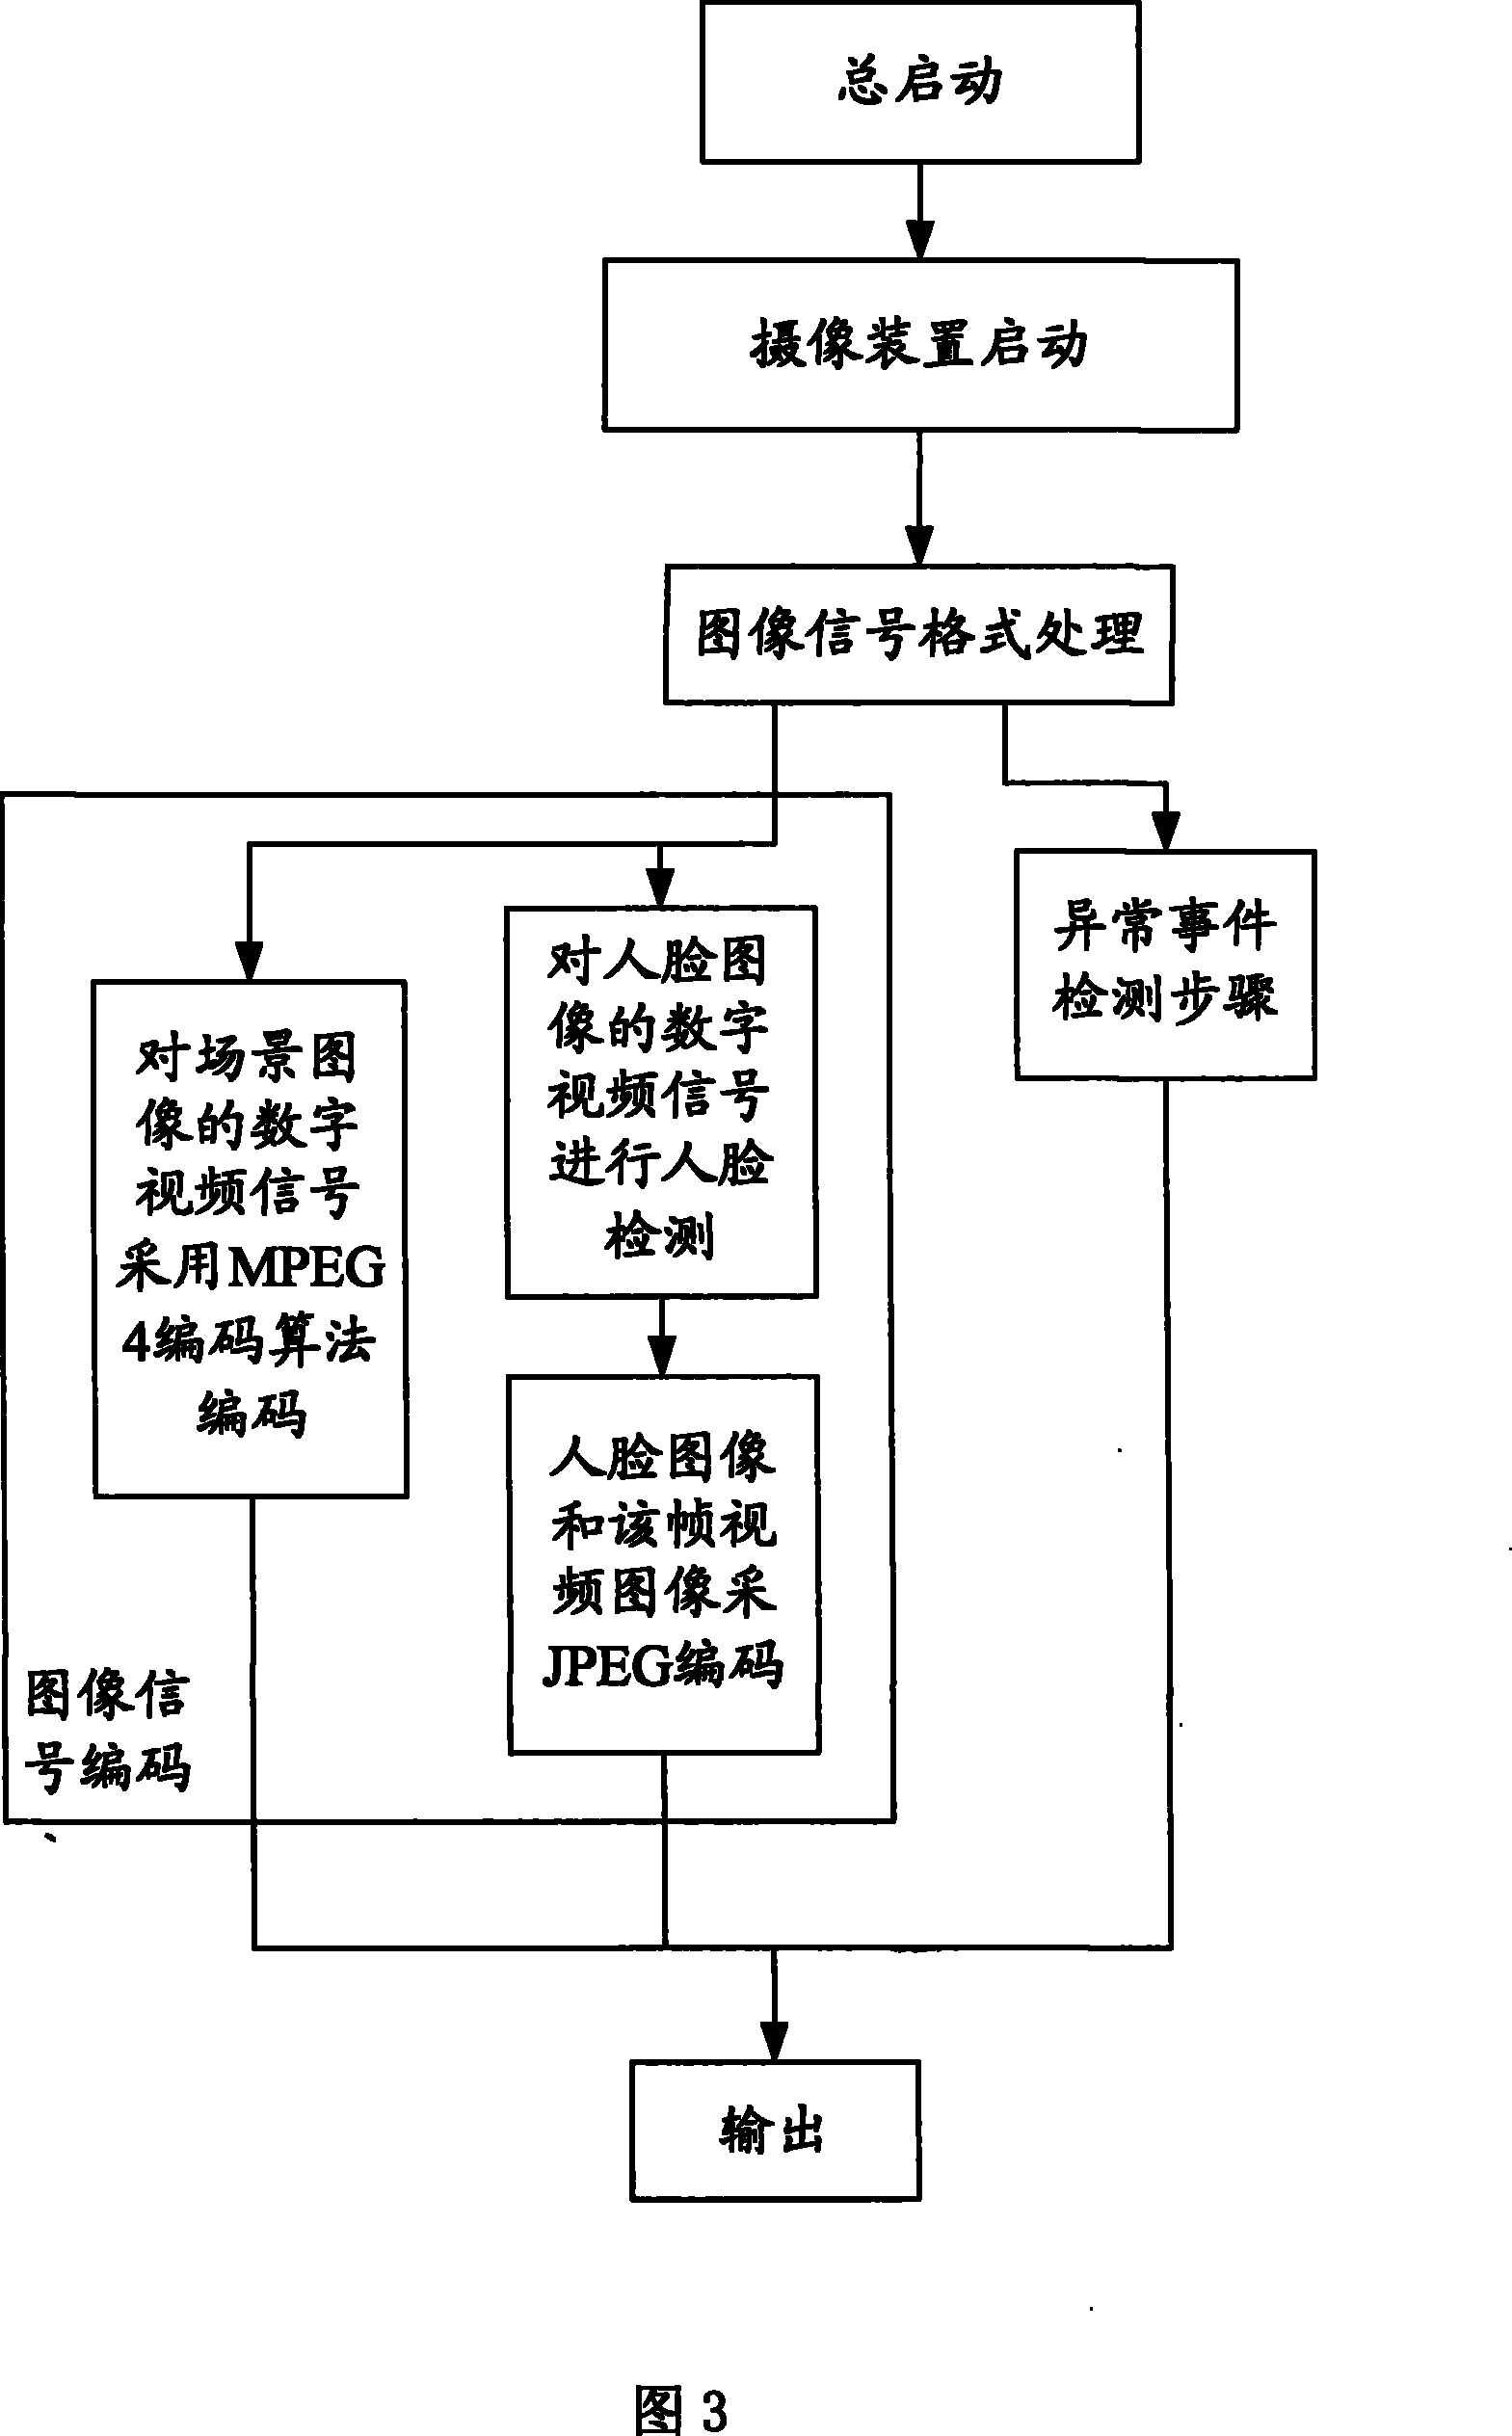 Intelligent monitoring apparatus and method for self-service bank and ATM